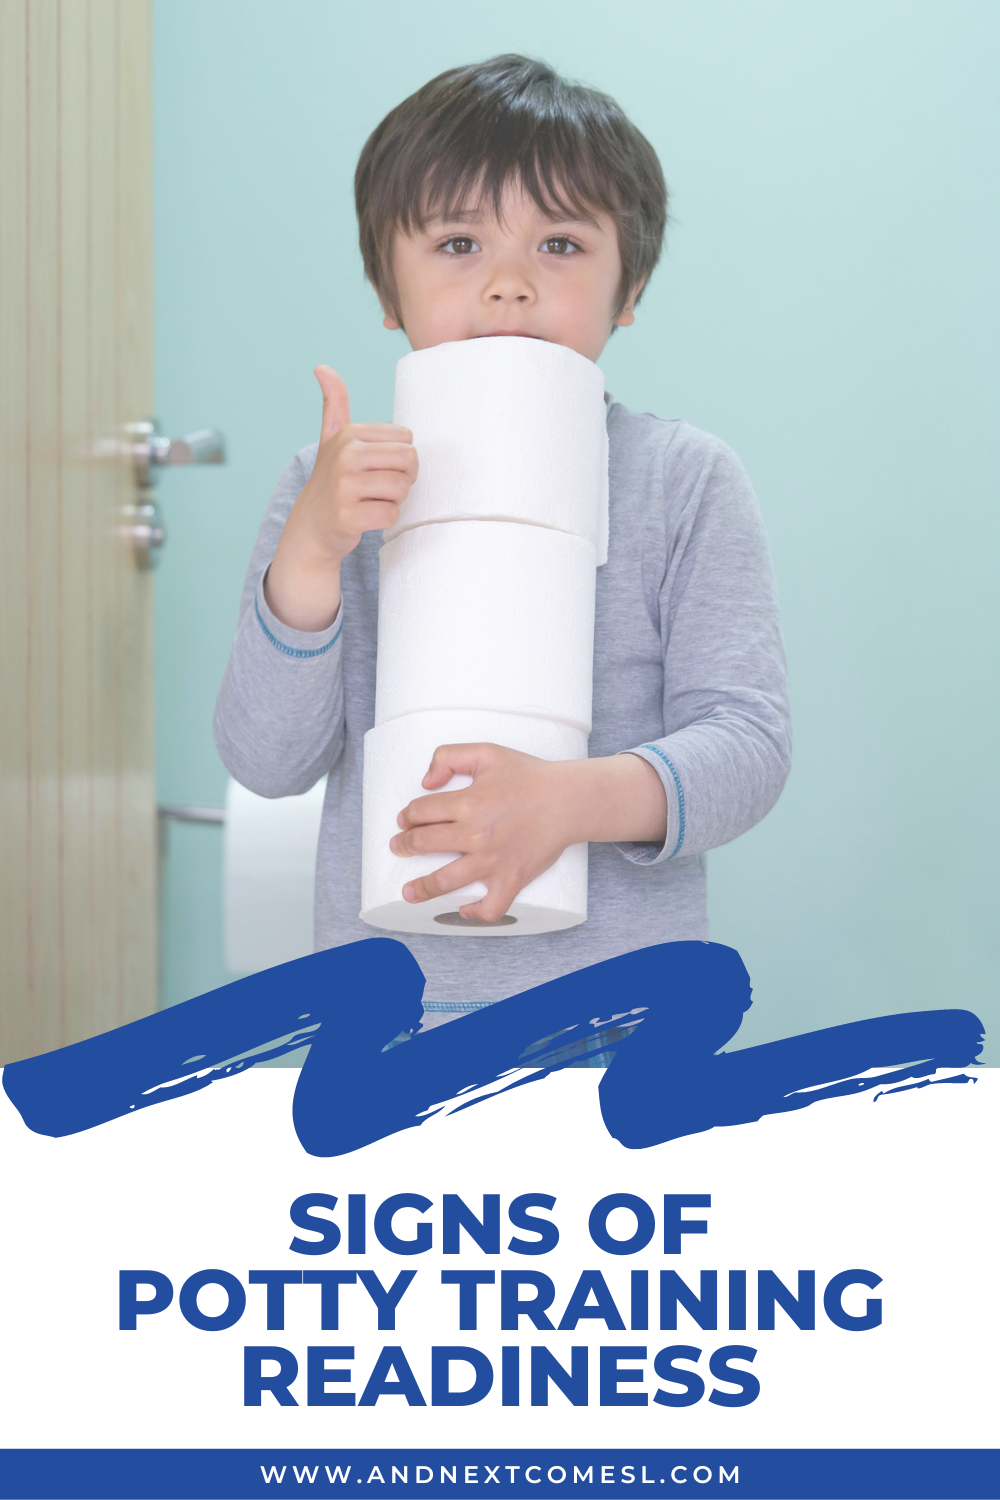 Signs of potty training readiness you should know about